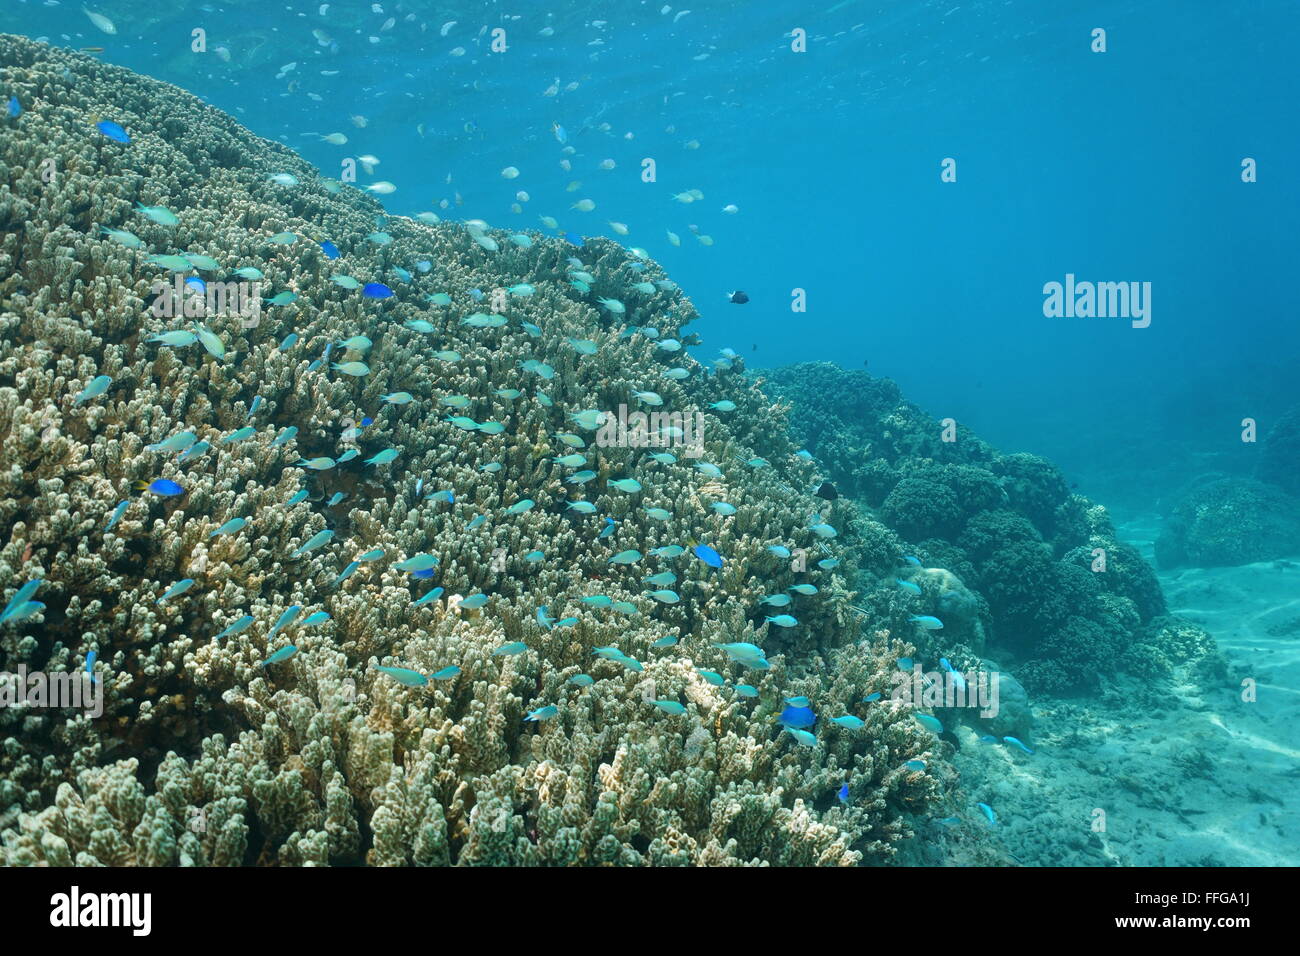 Underwater coral reef with school of chromis fish, Huahine island, Pacific ocean, French Polynesia Stock Photo